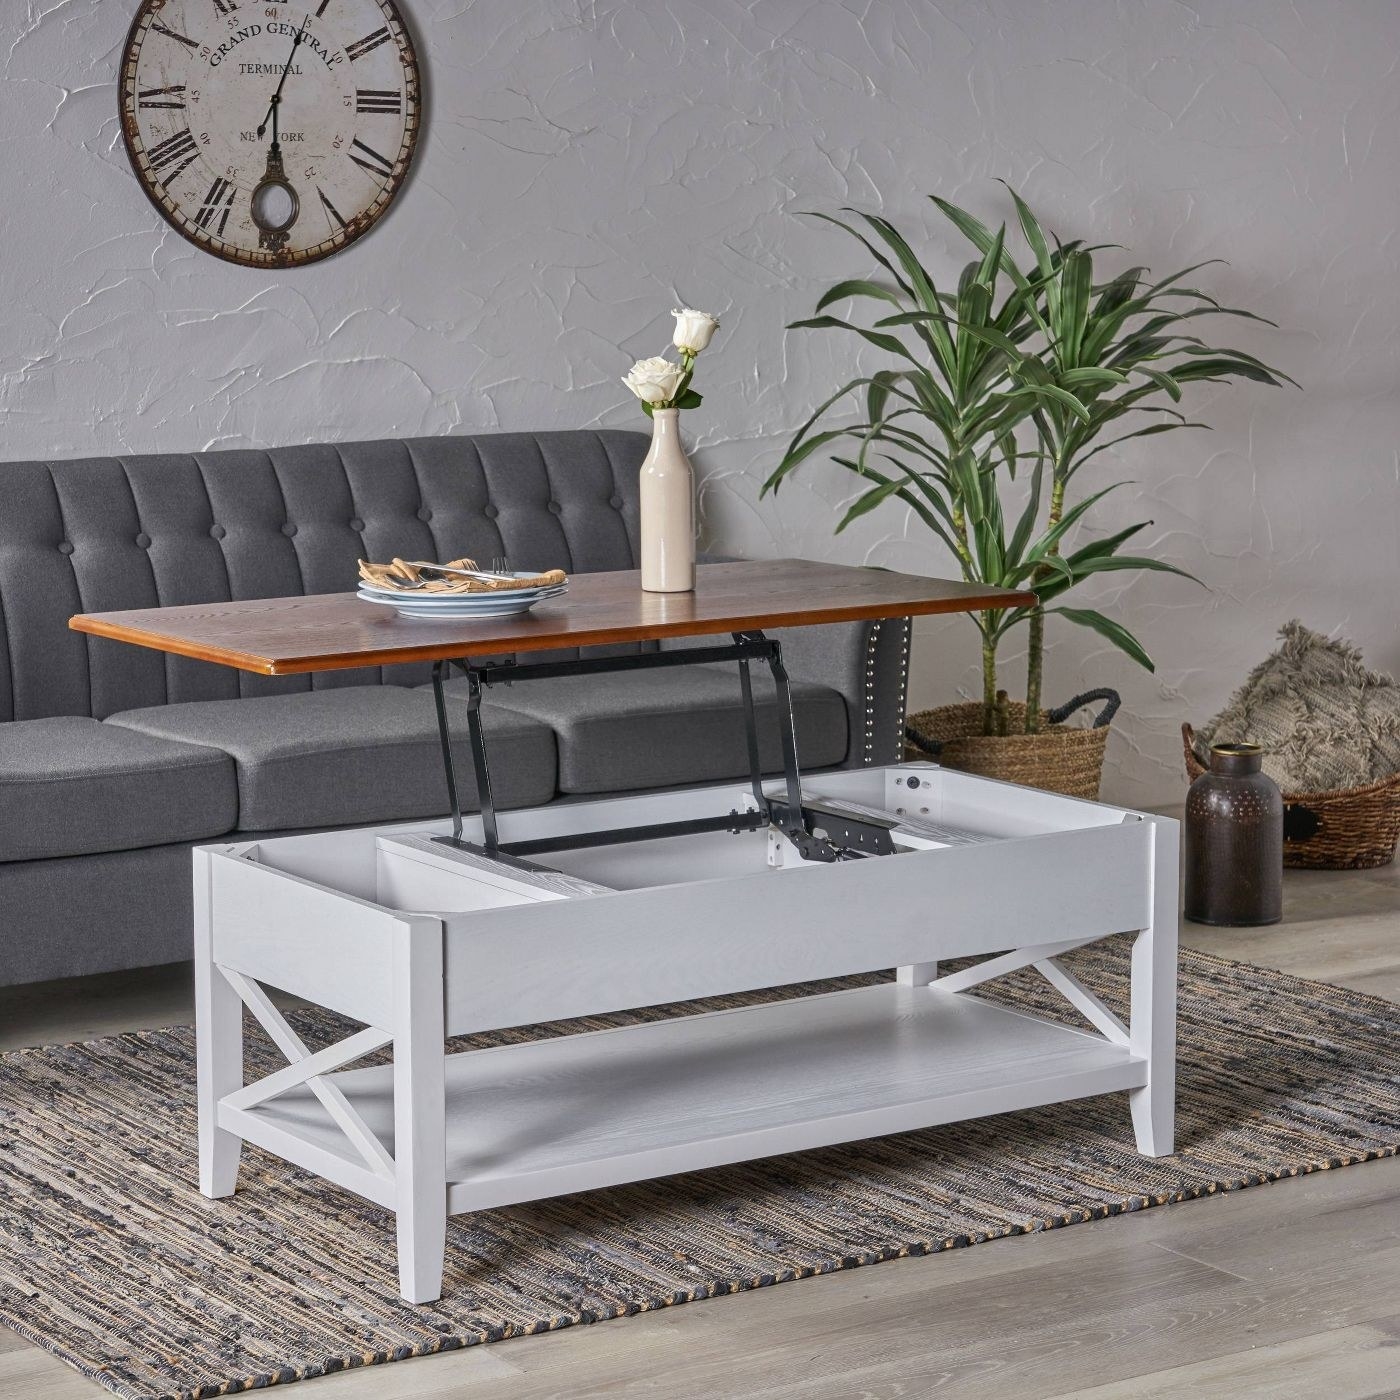 The coffee table in white with the top lifted up